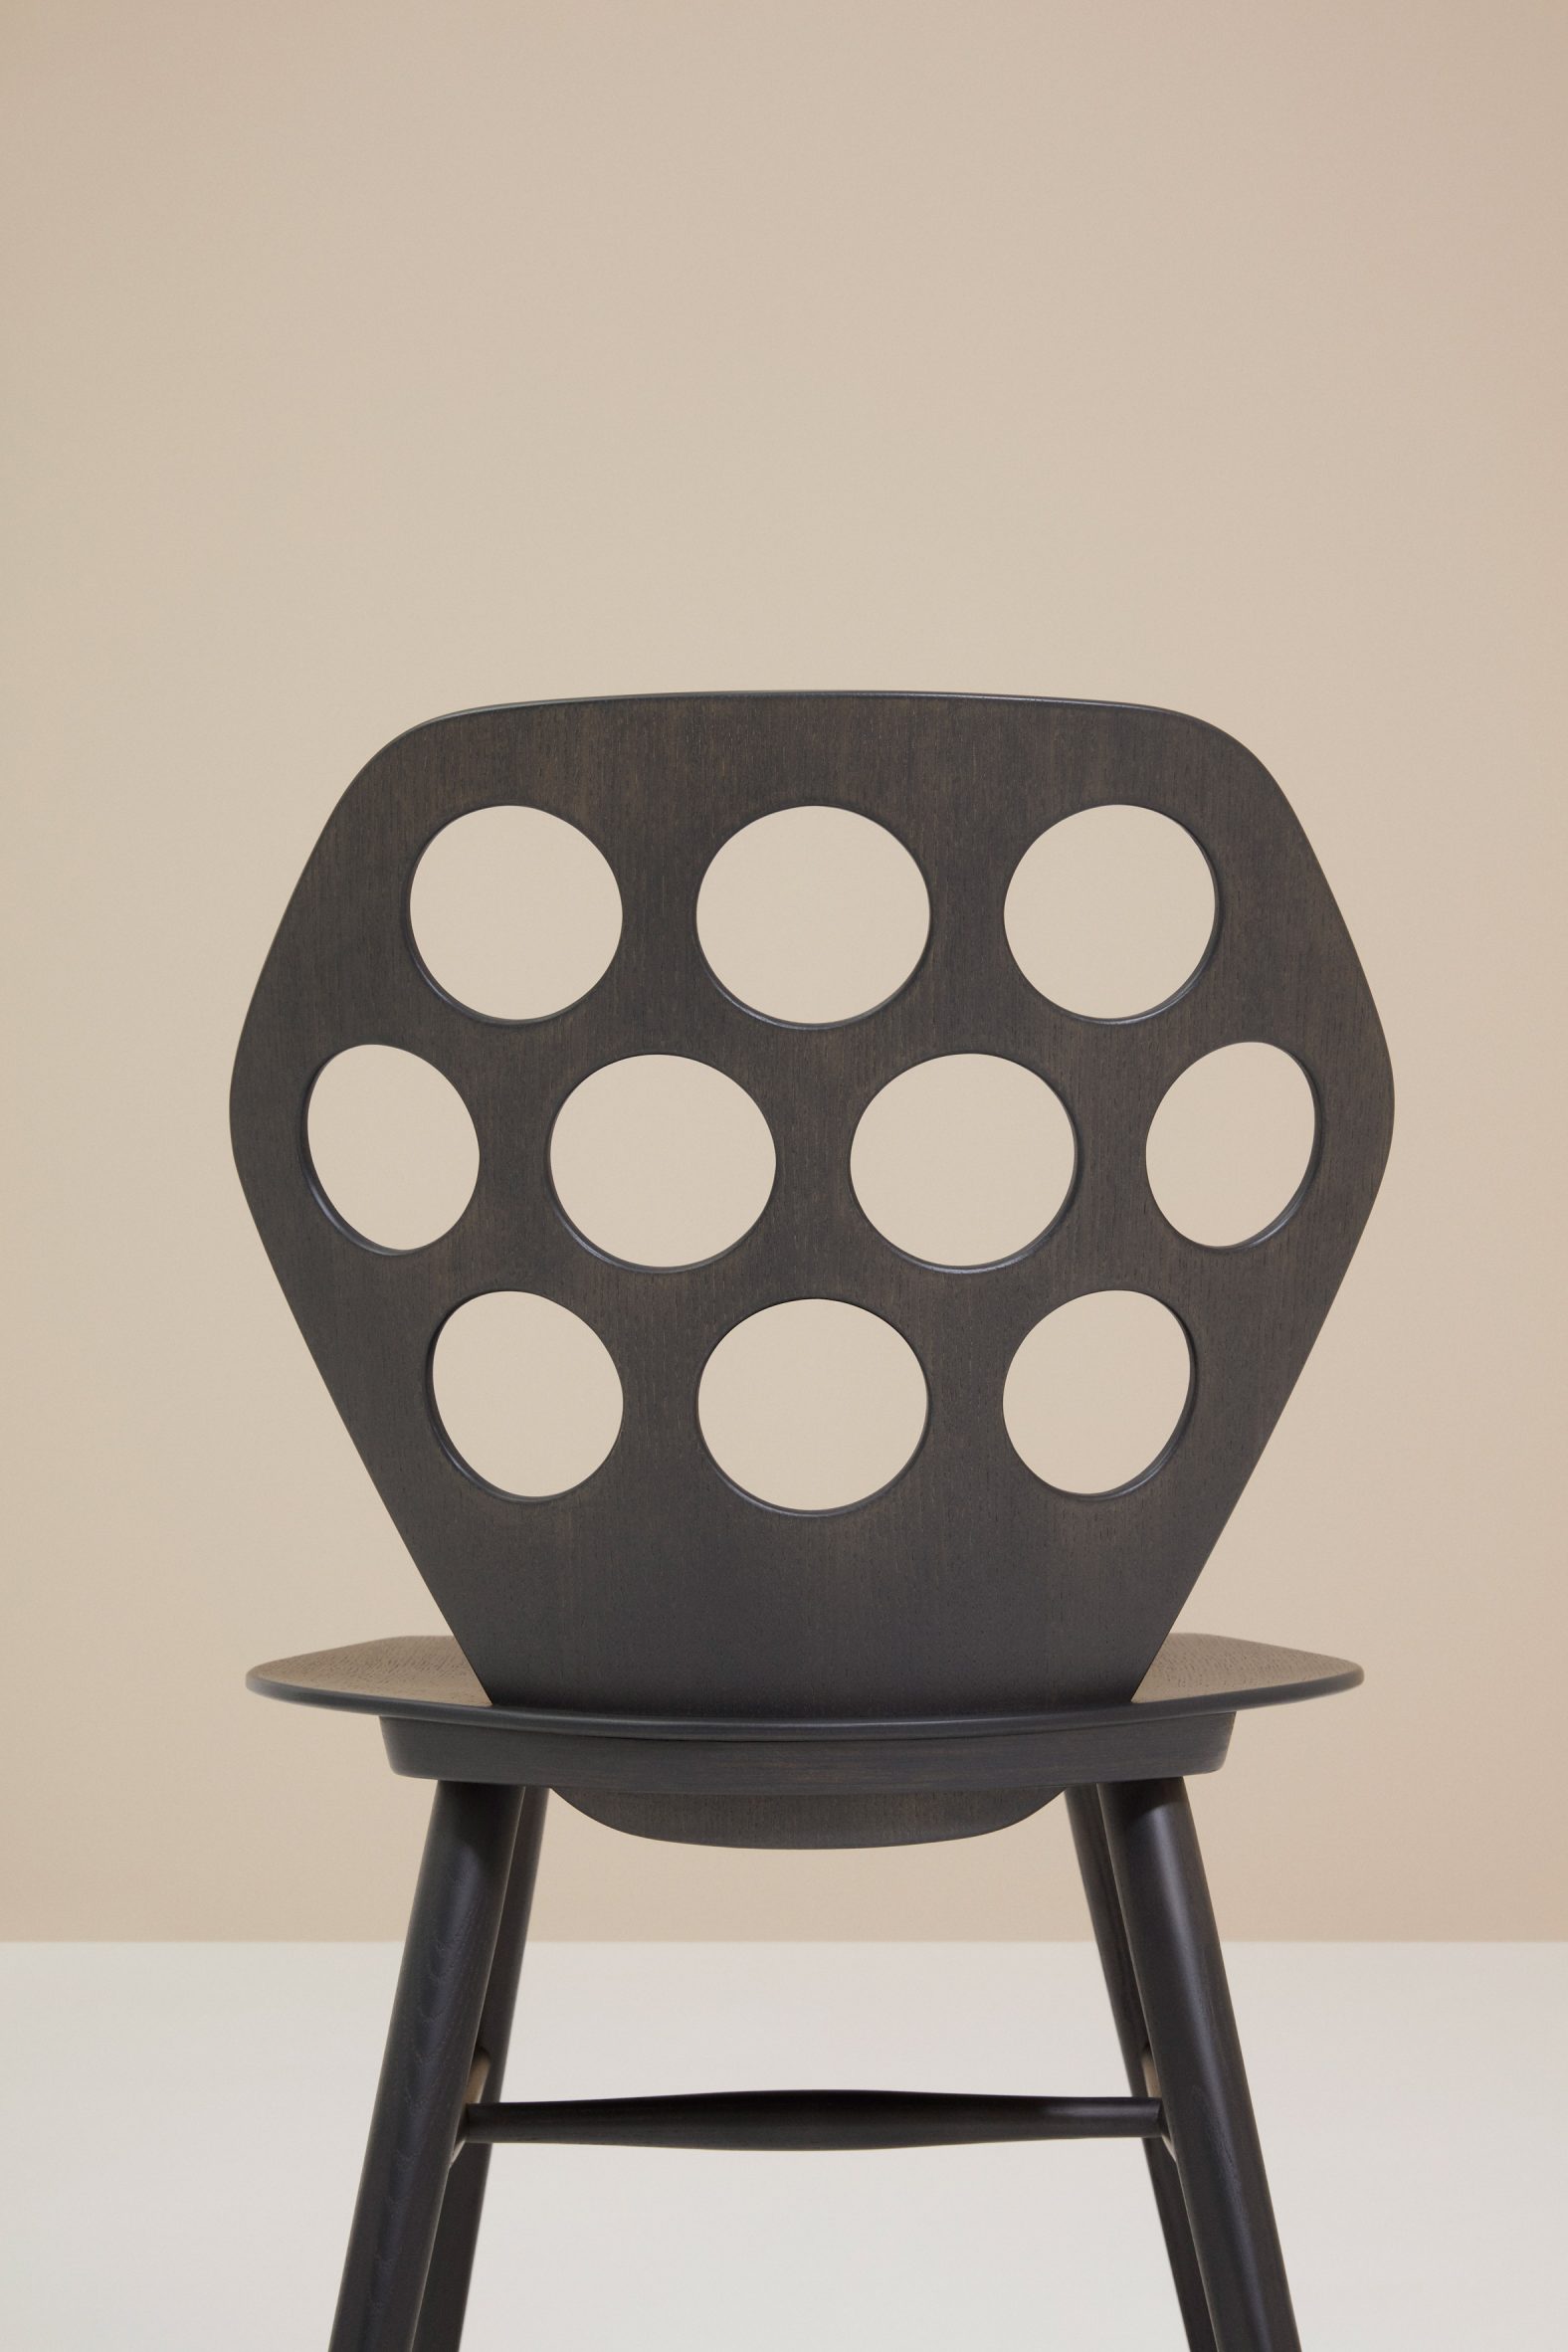 Photograph showing detail of perforated backrest version of chair